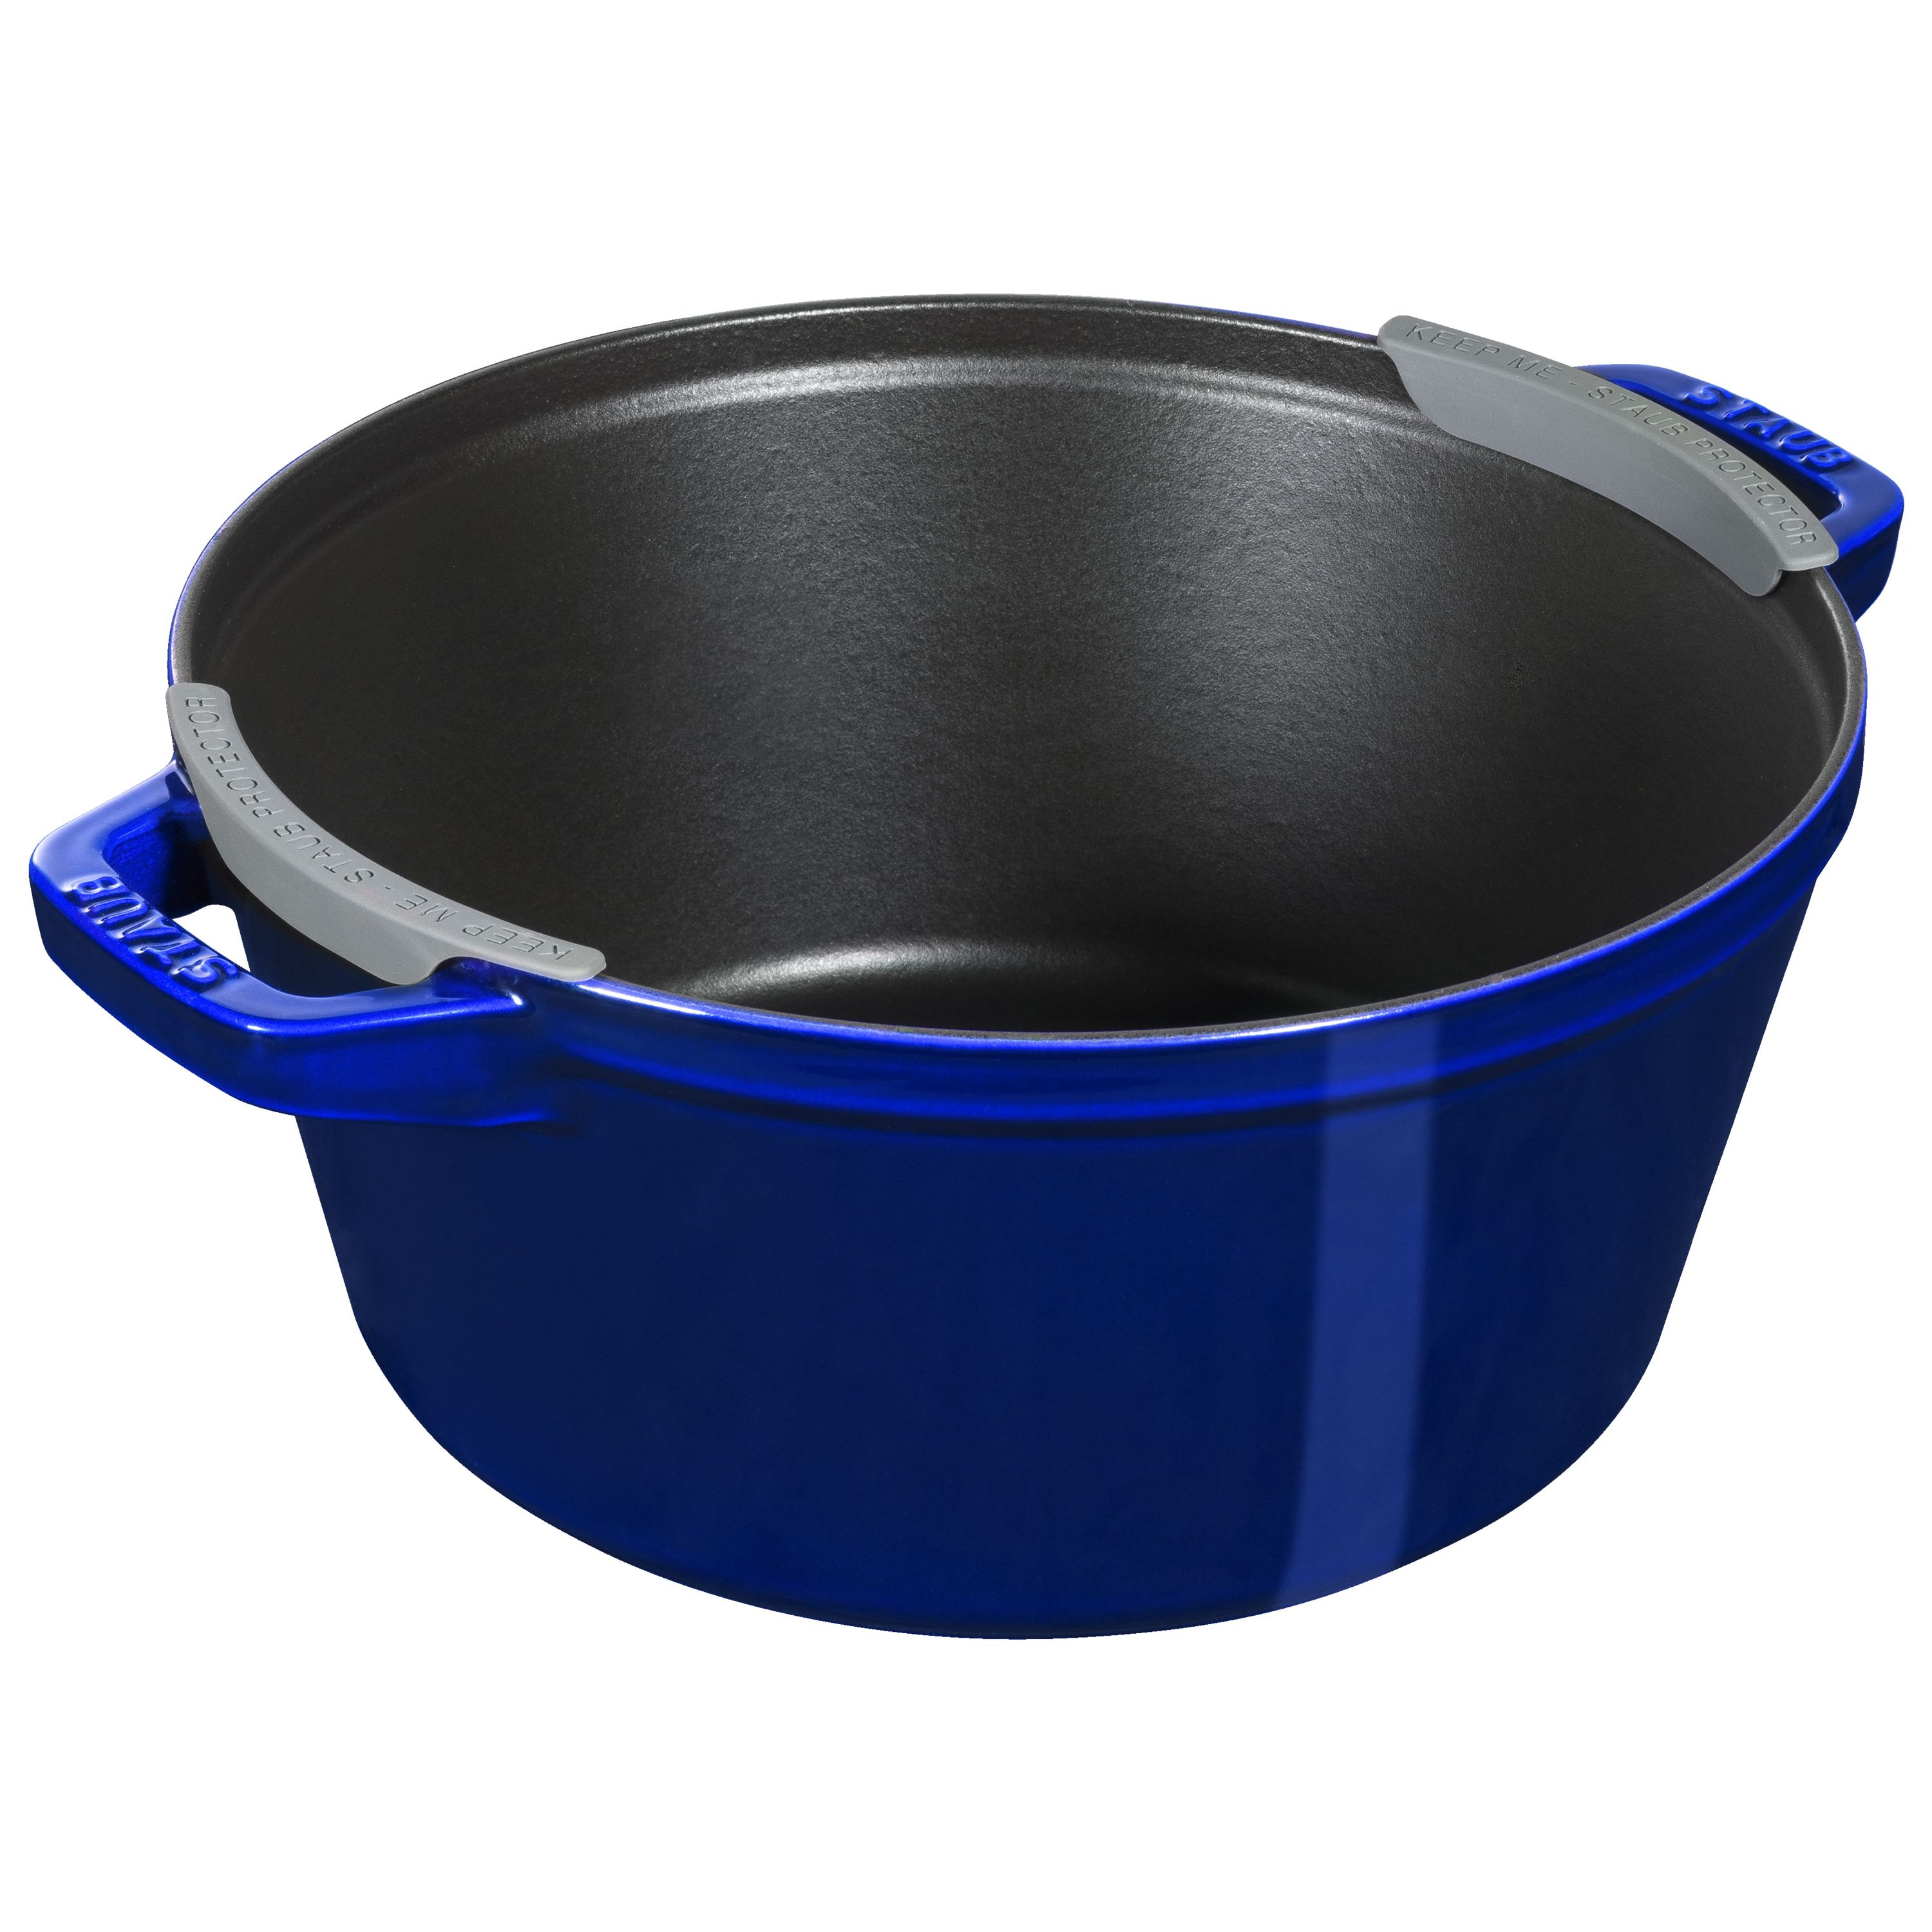 Staub New Stackable Cookware Collection at Williams Sonoma